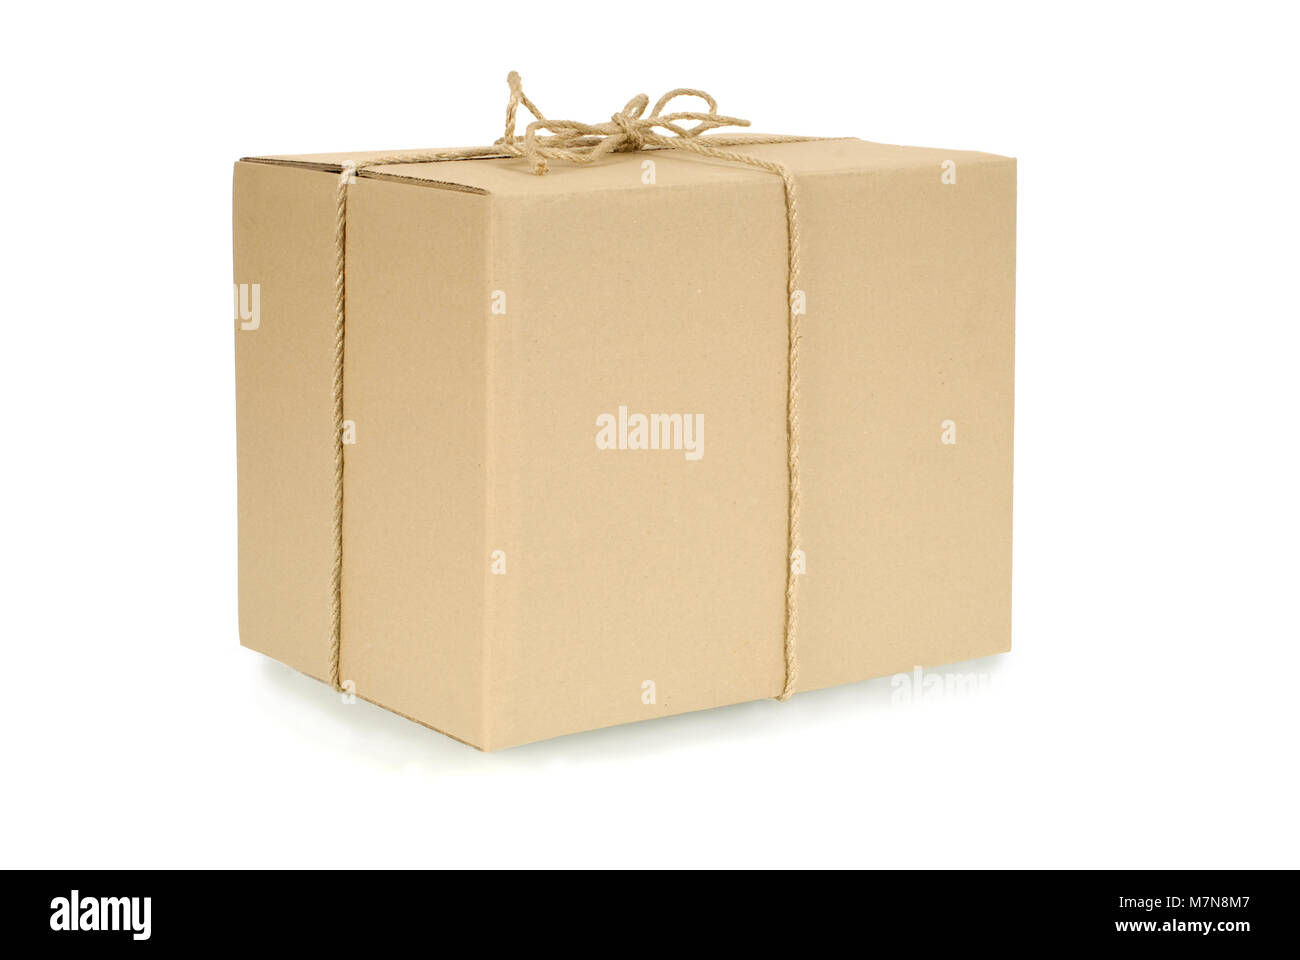 Plain brown blank cardboard box tied with rope or string and